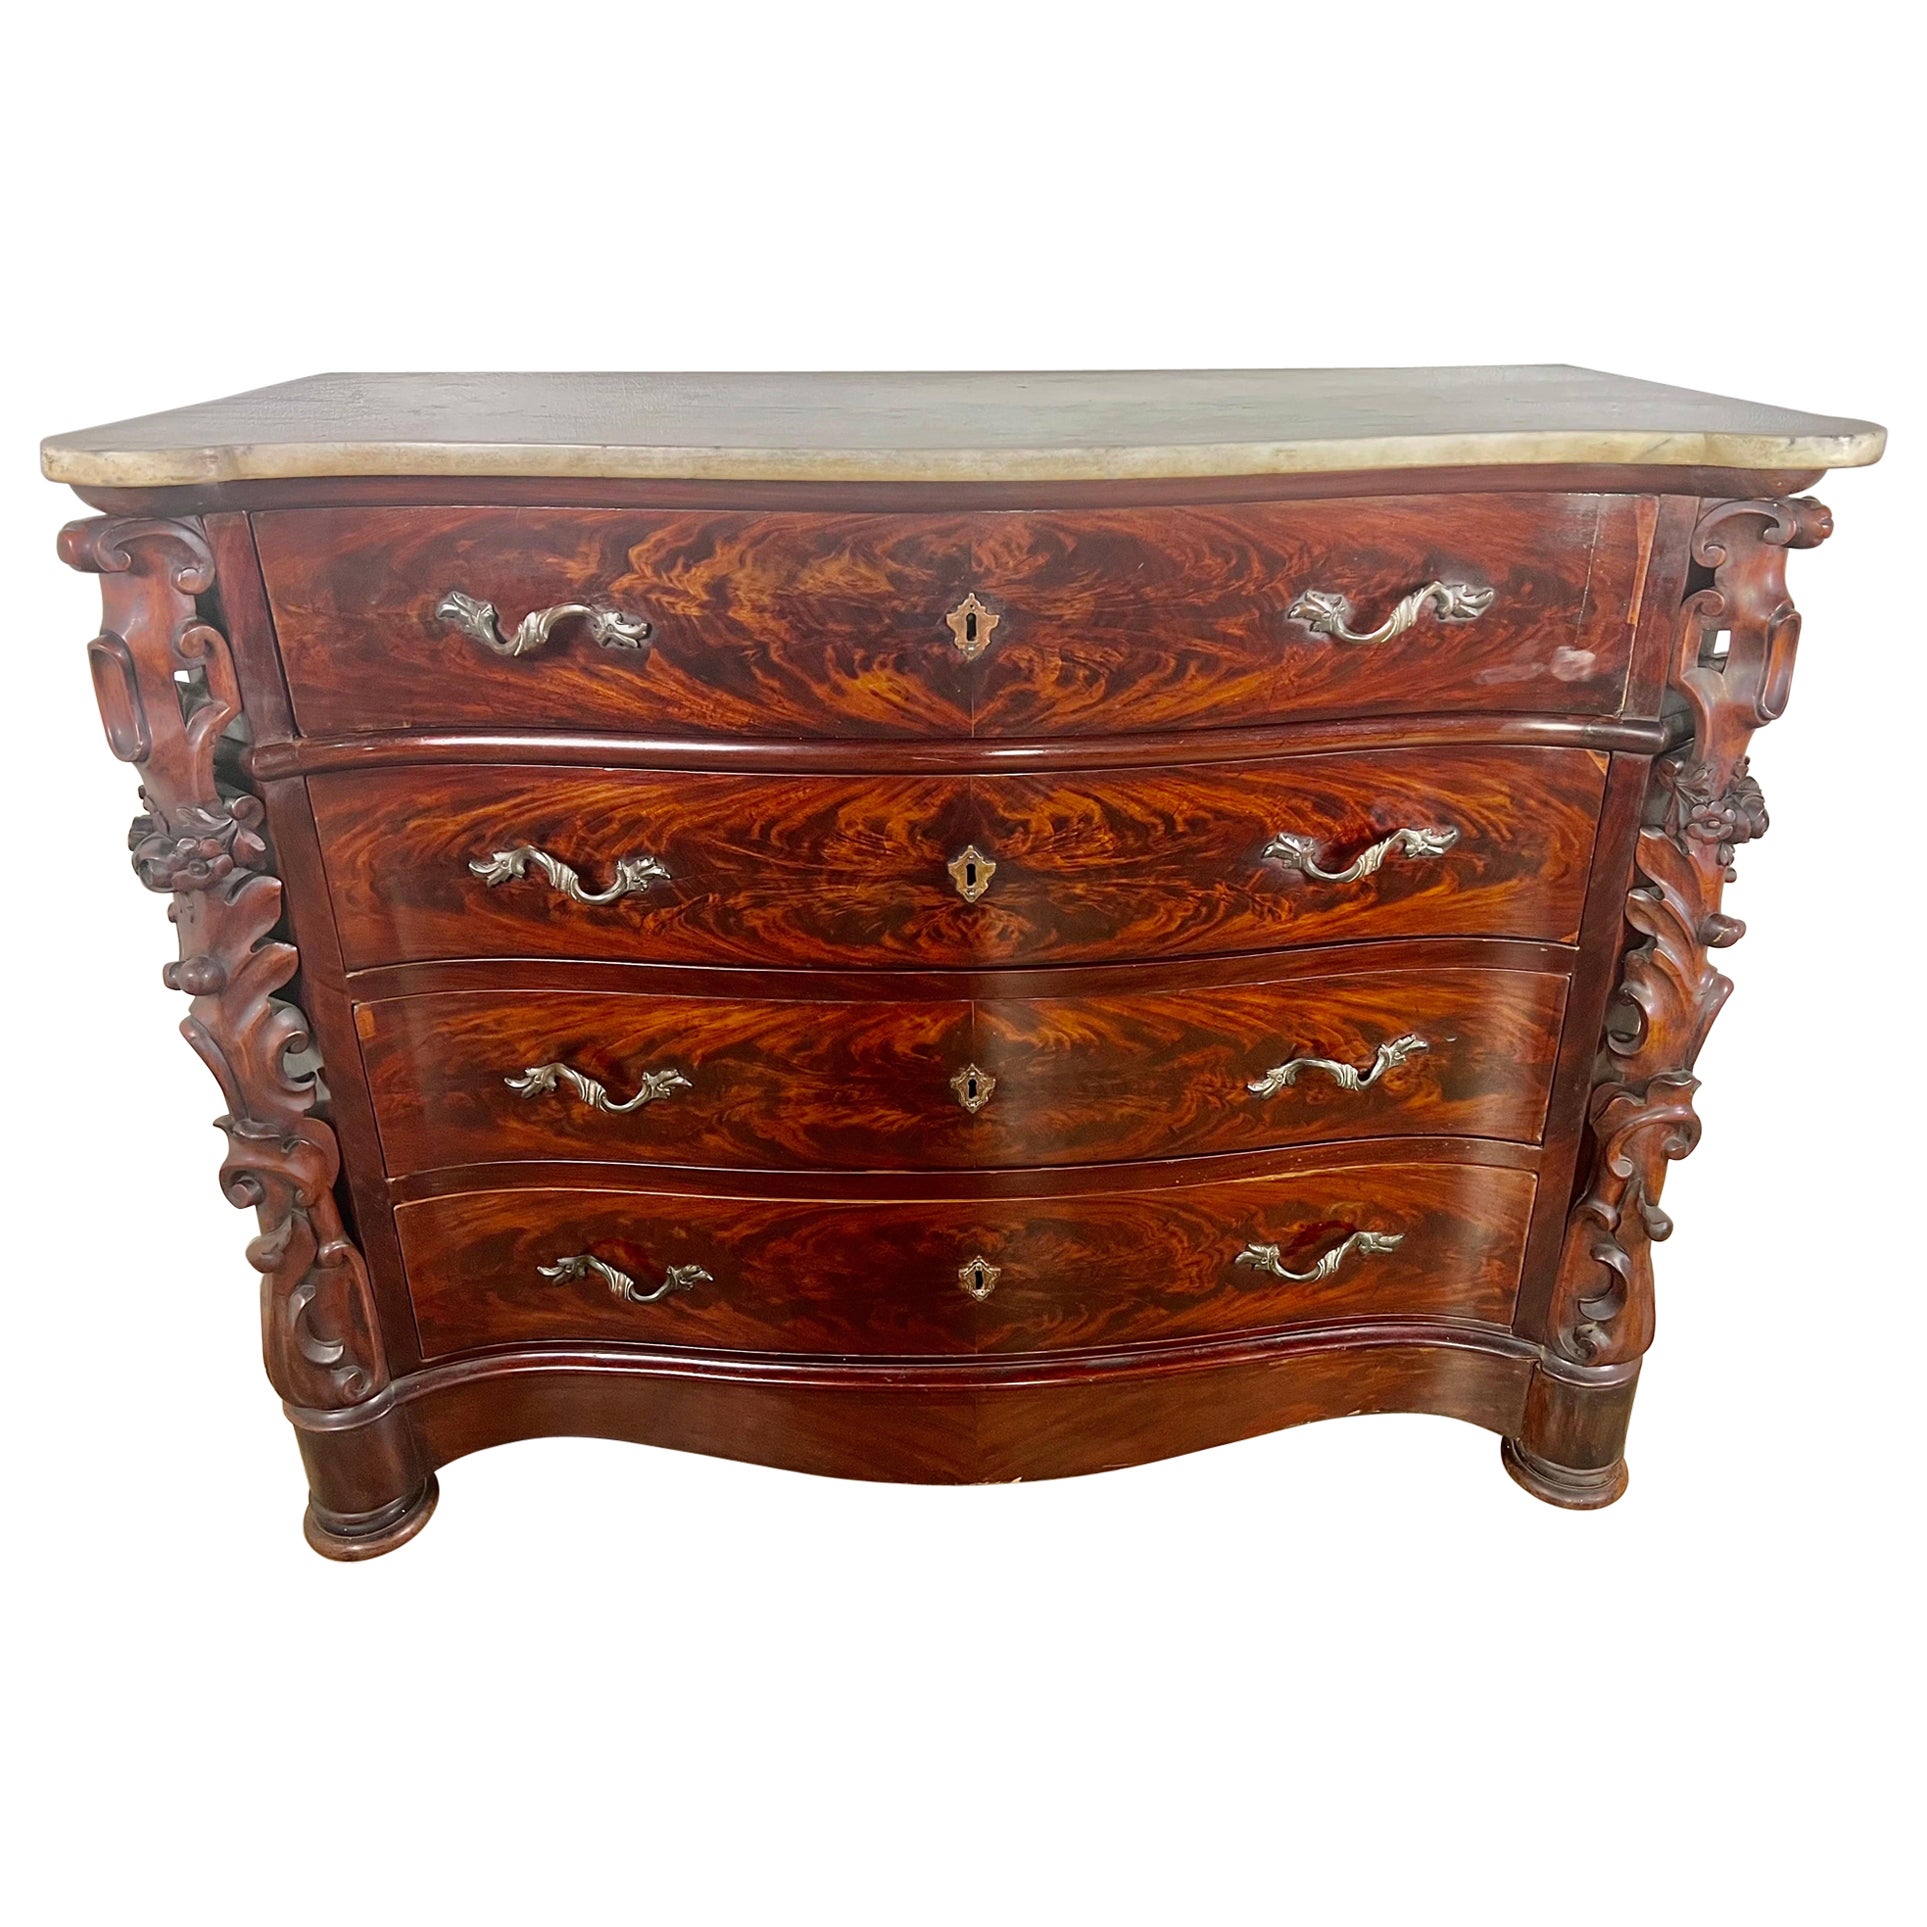 19th Century English Feathered Mahogany '4' Drawer Commode For Sale